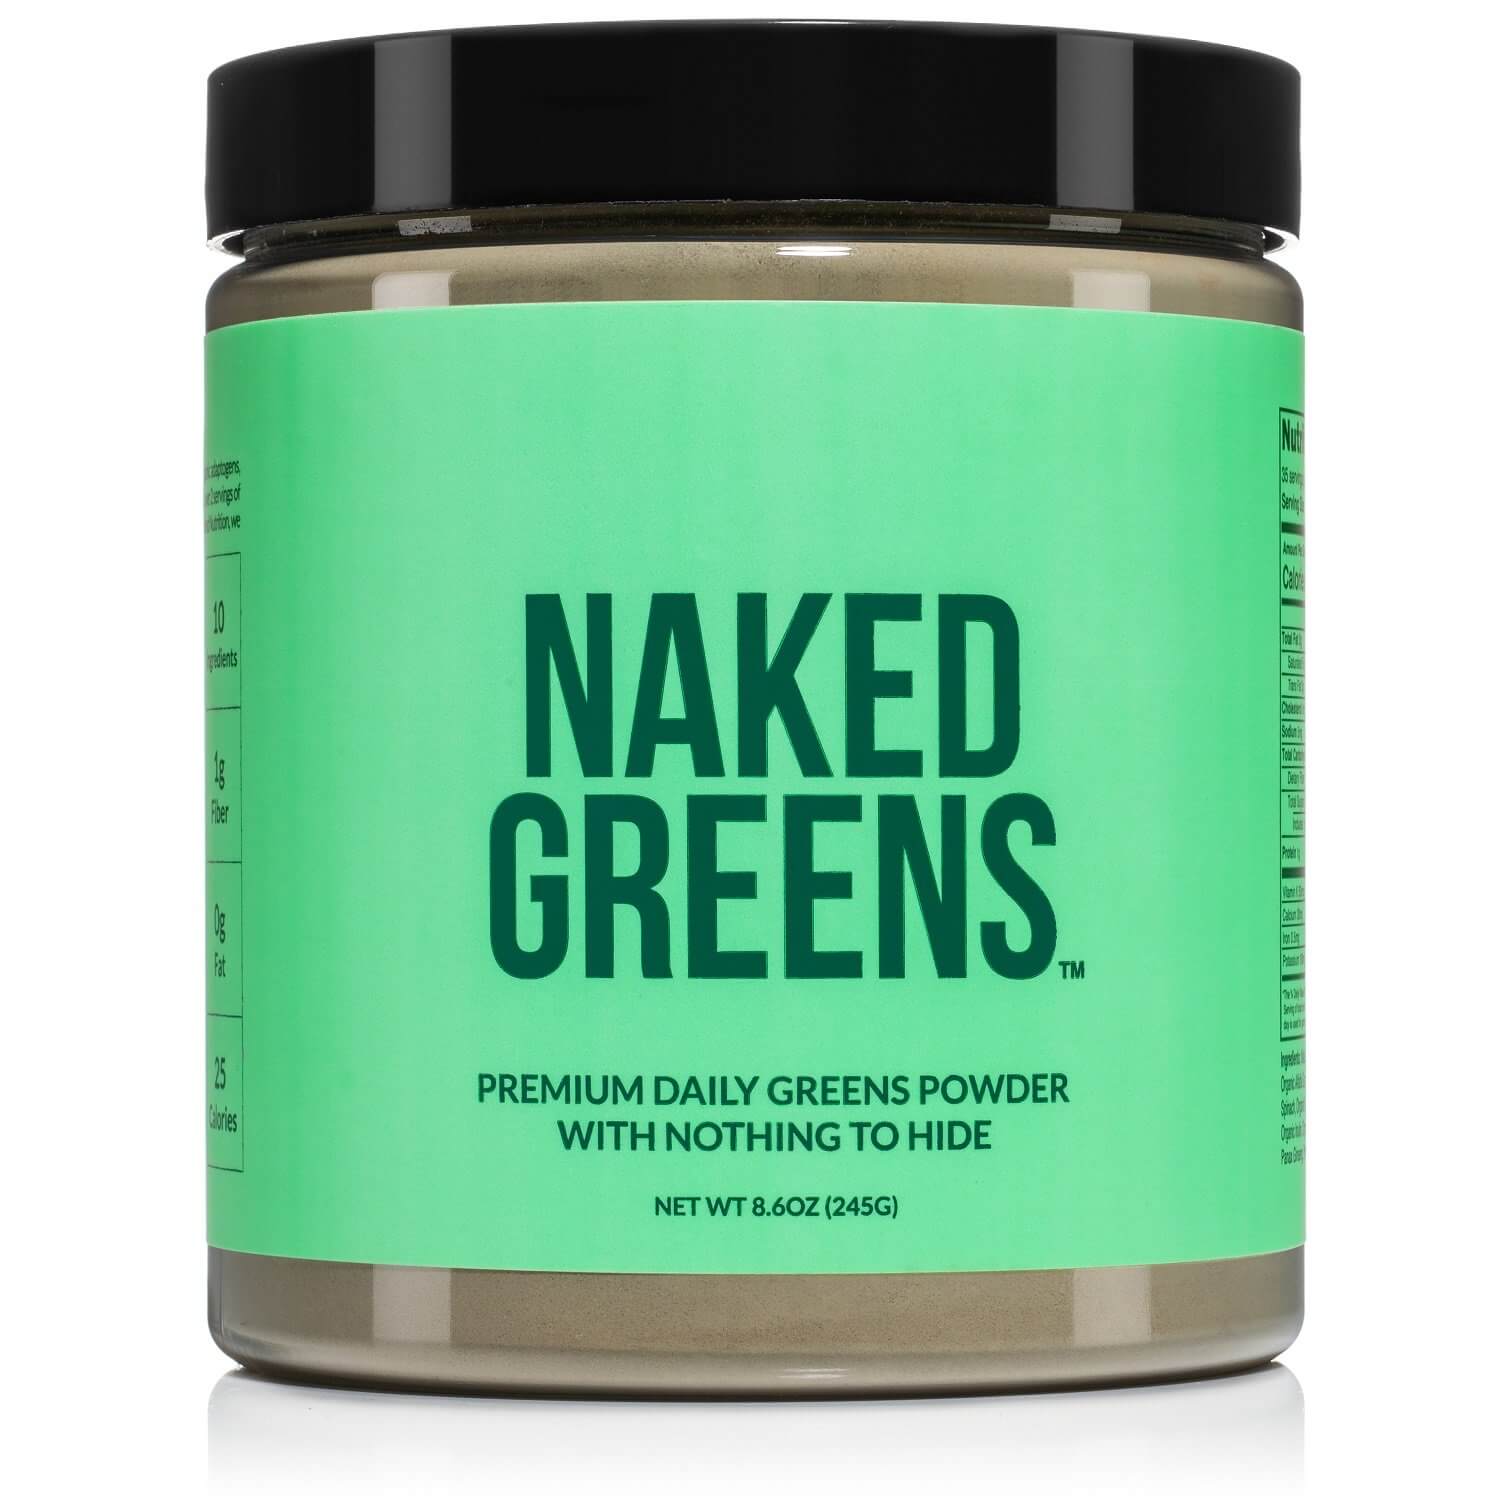 Review of The Best 6 Superfood (Green) Powders On The Market